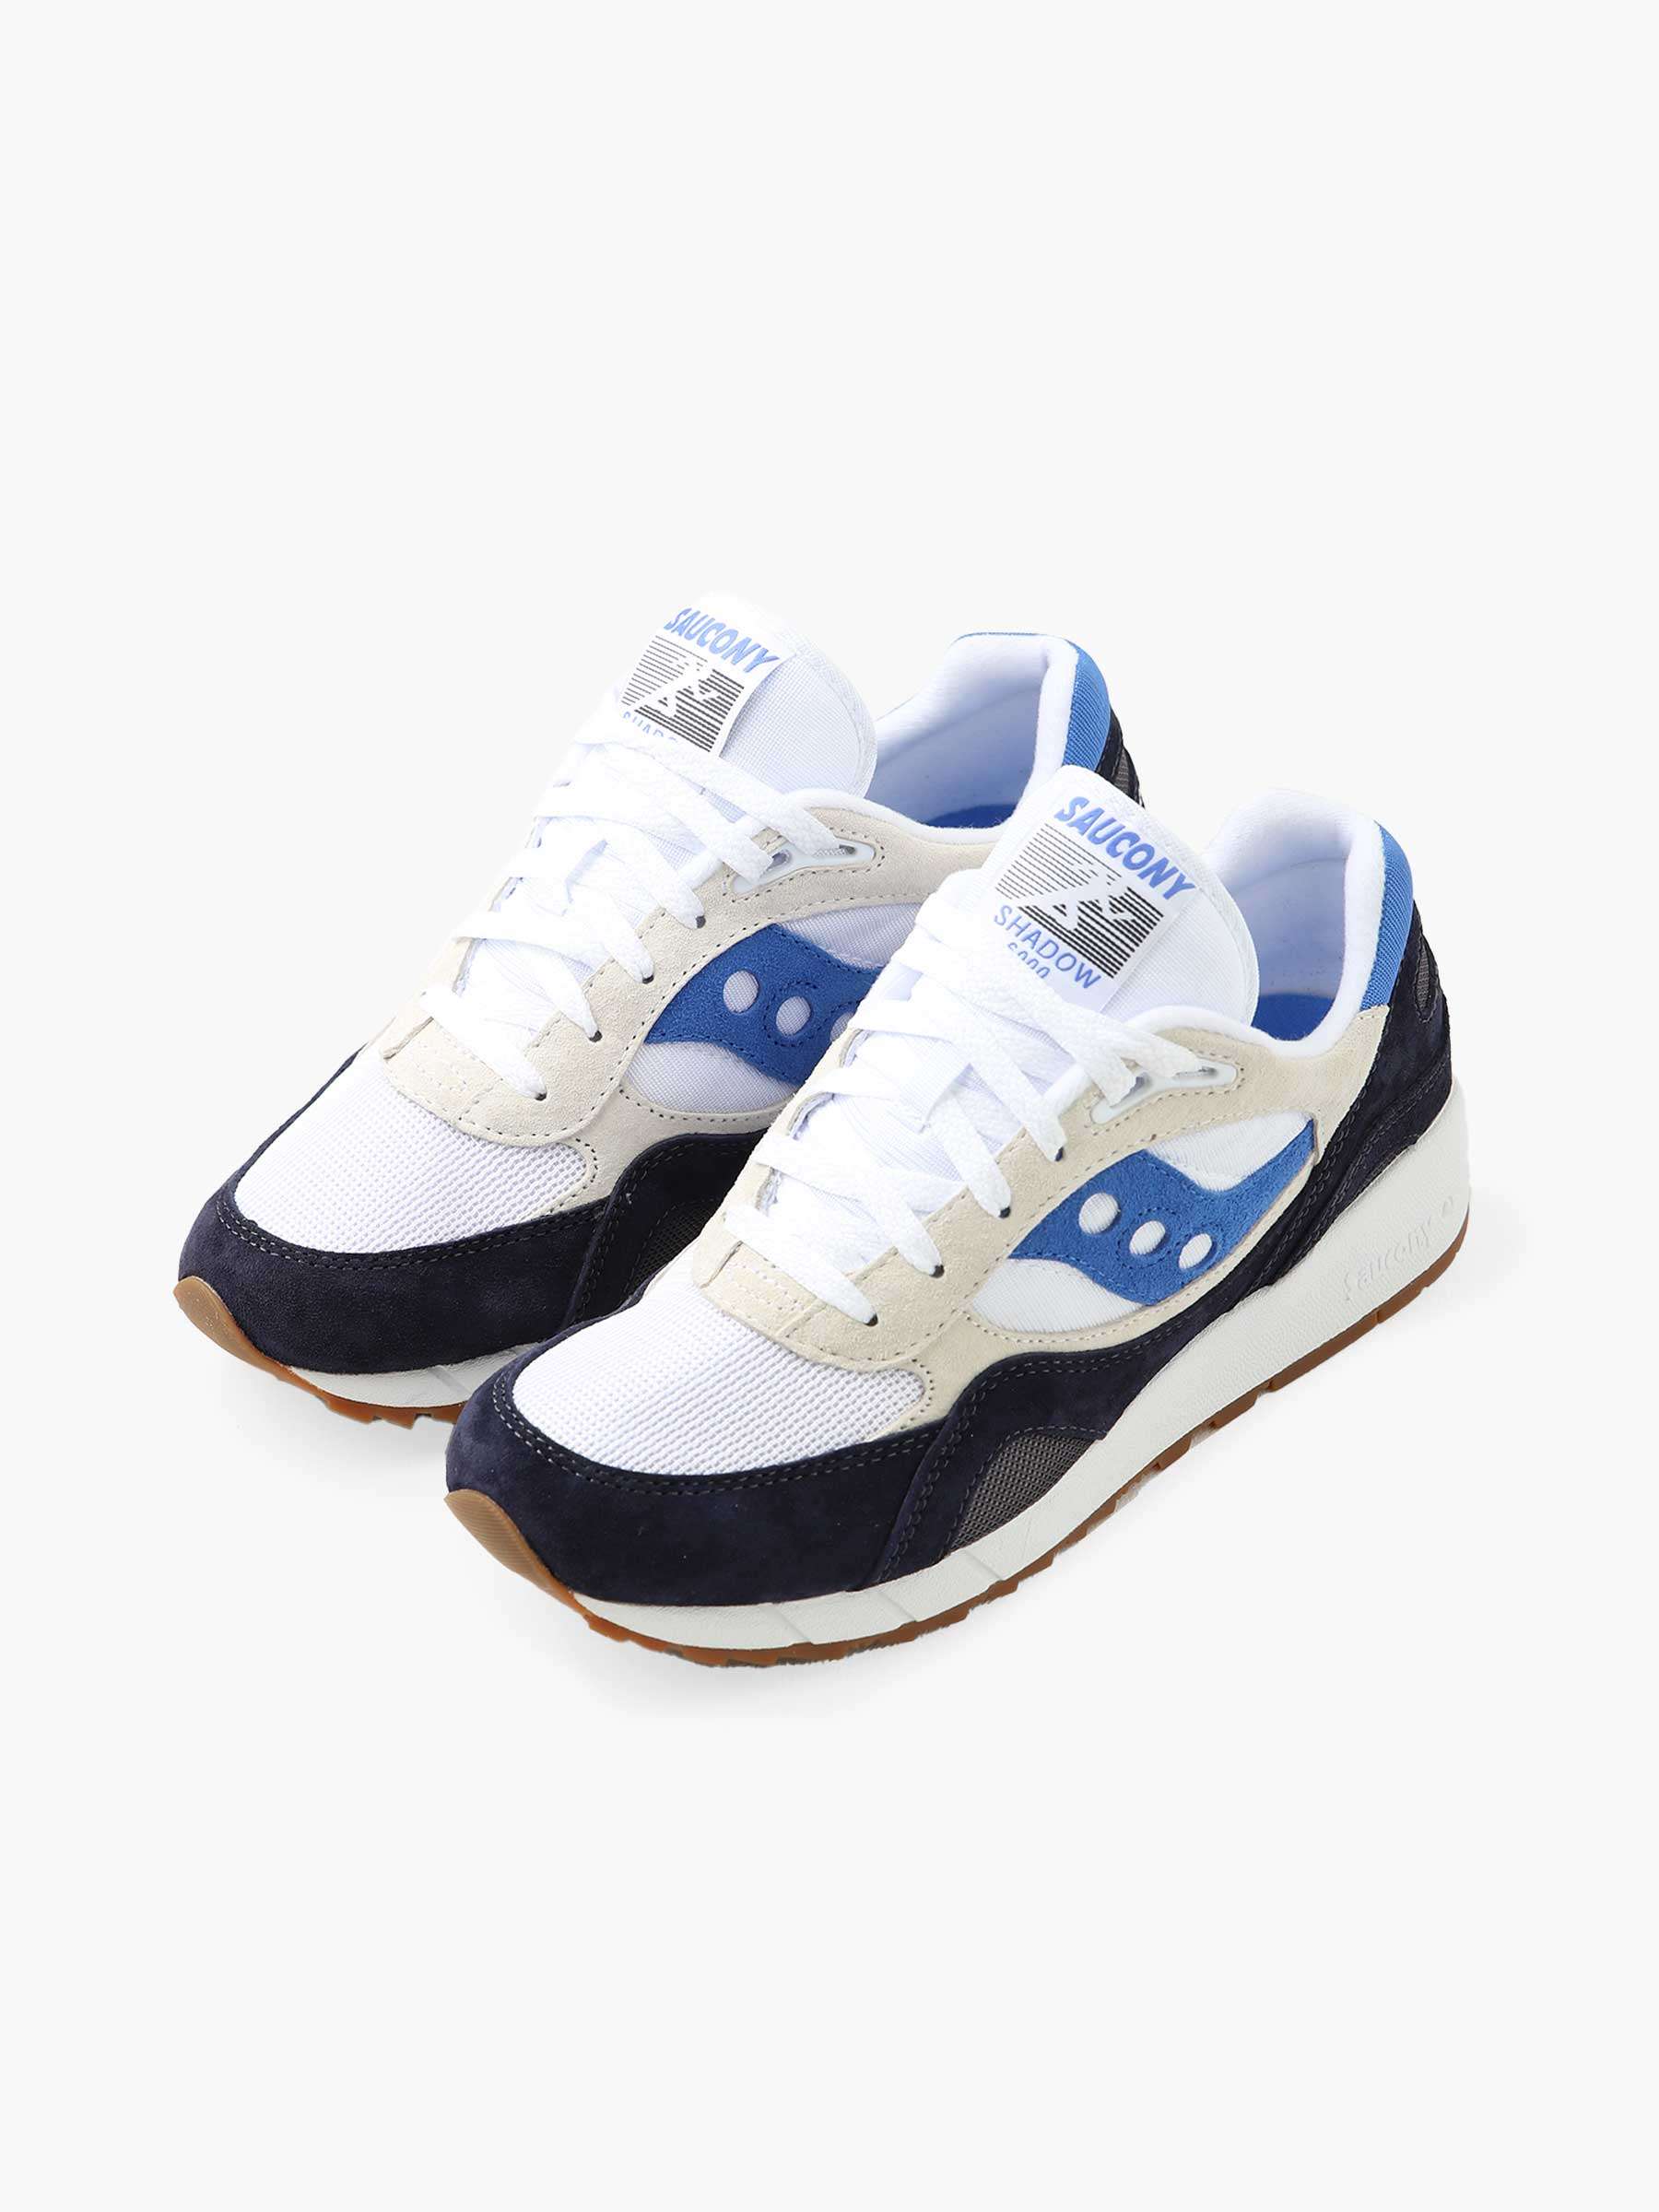 Shadow 6000 White Navy Blue S70441-44